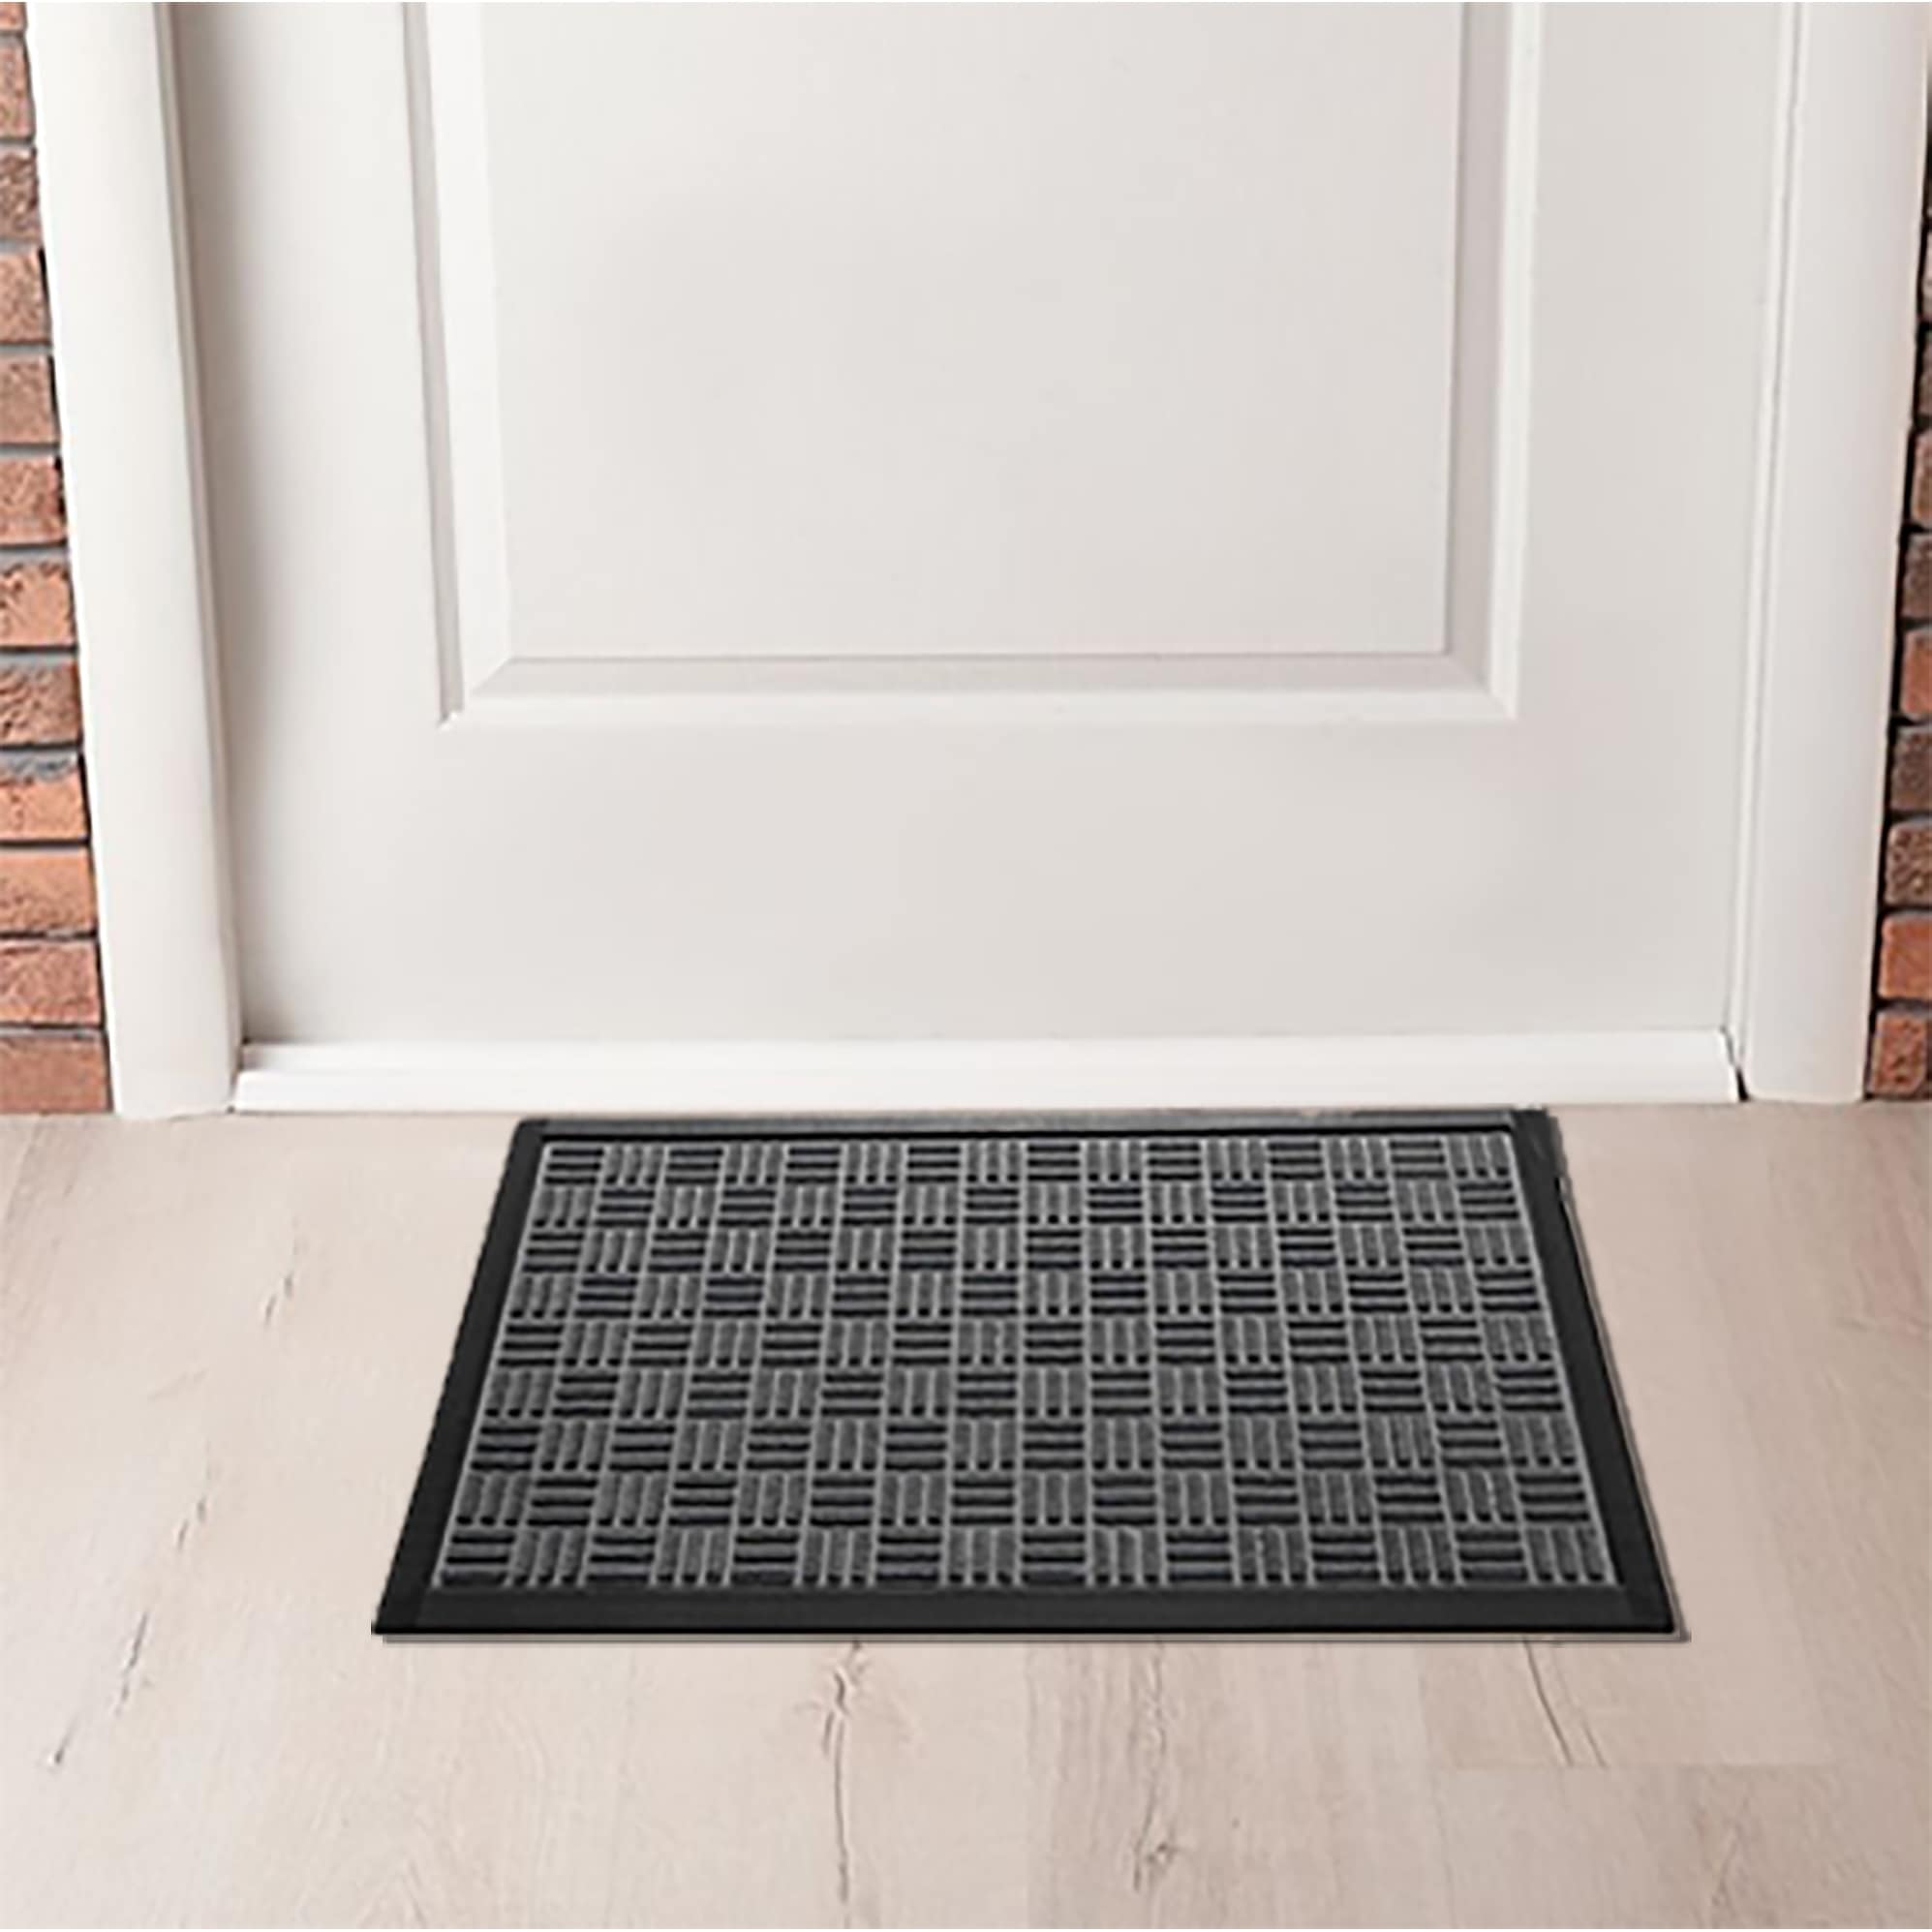 https://ak1.ostkcdn.com/images/products/is/images/direct/82a366c8661315c961d5a0180b74507c1a3d5d6c/Outdoor-Front-Door-Mat-Checkerboard-Yvan-Polypropylene-Rubber-Rug-Grey.jpg